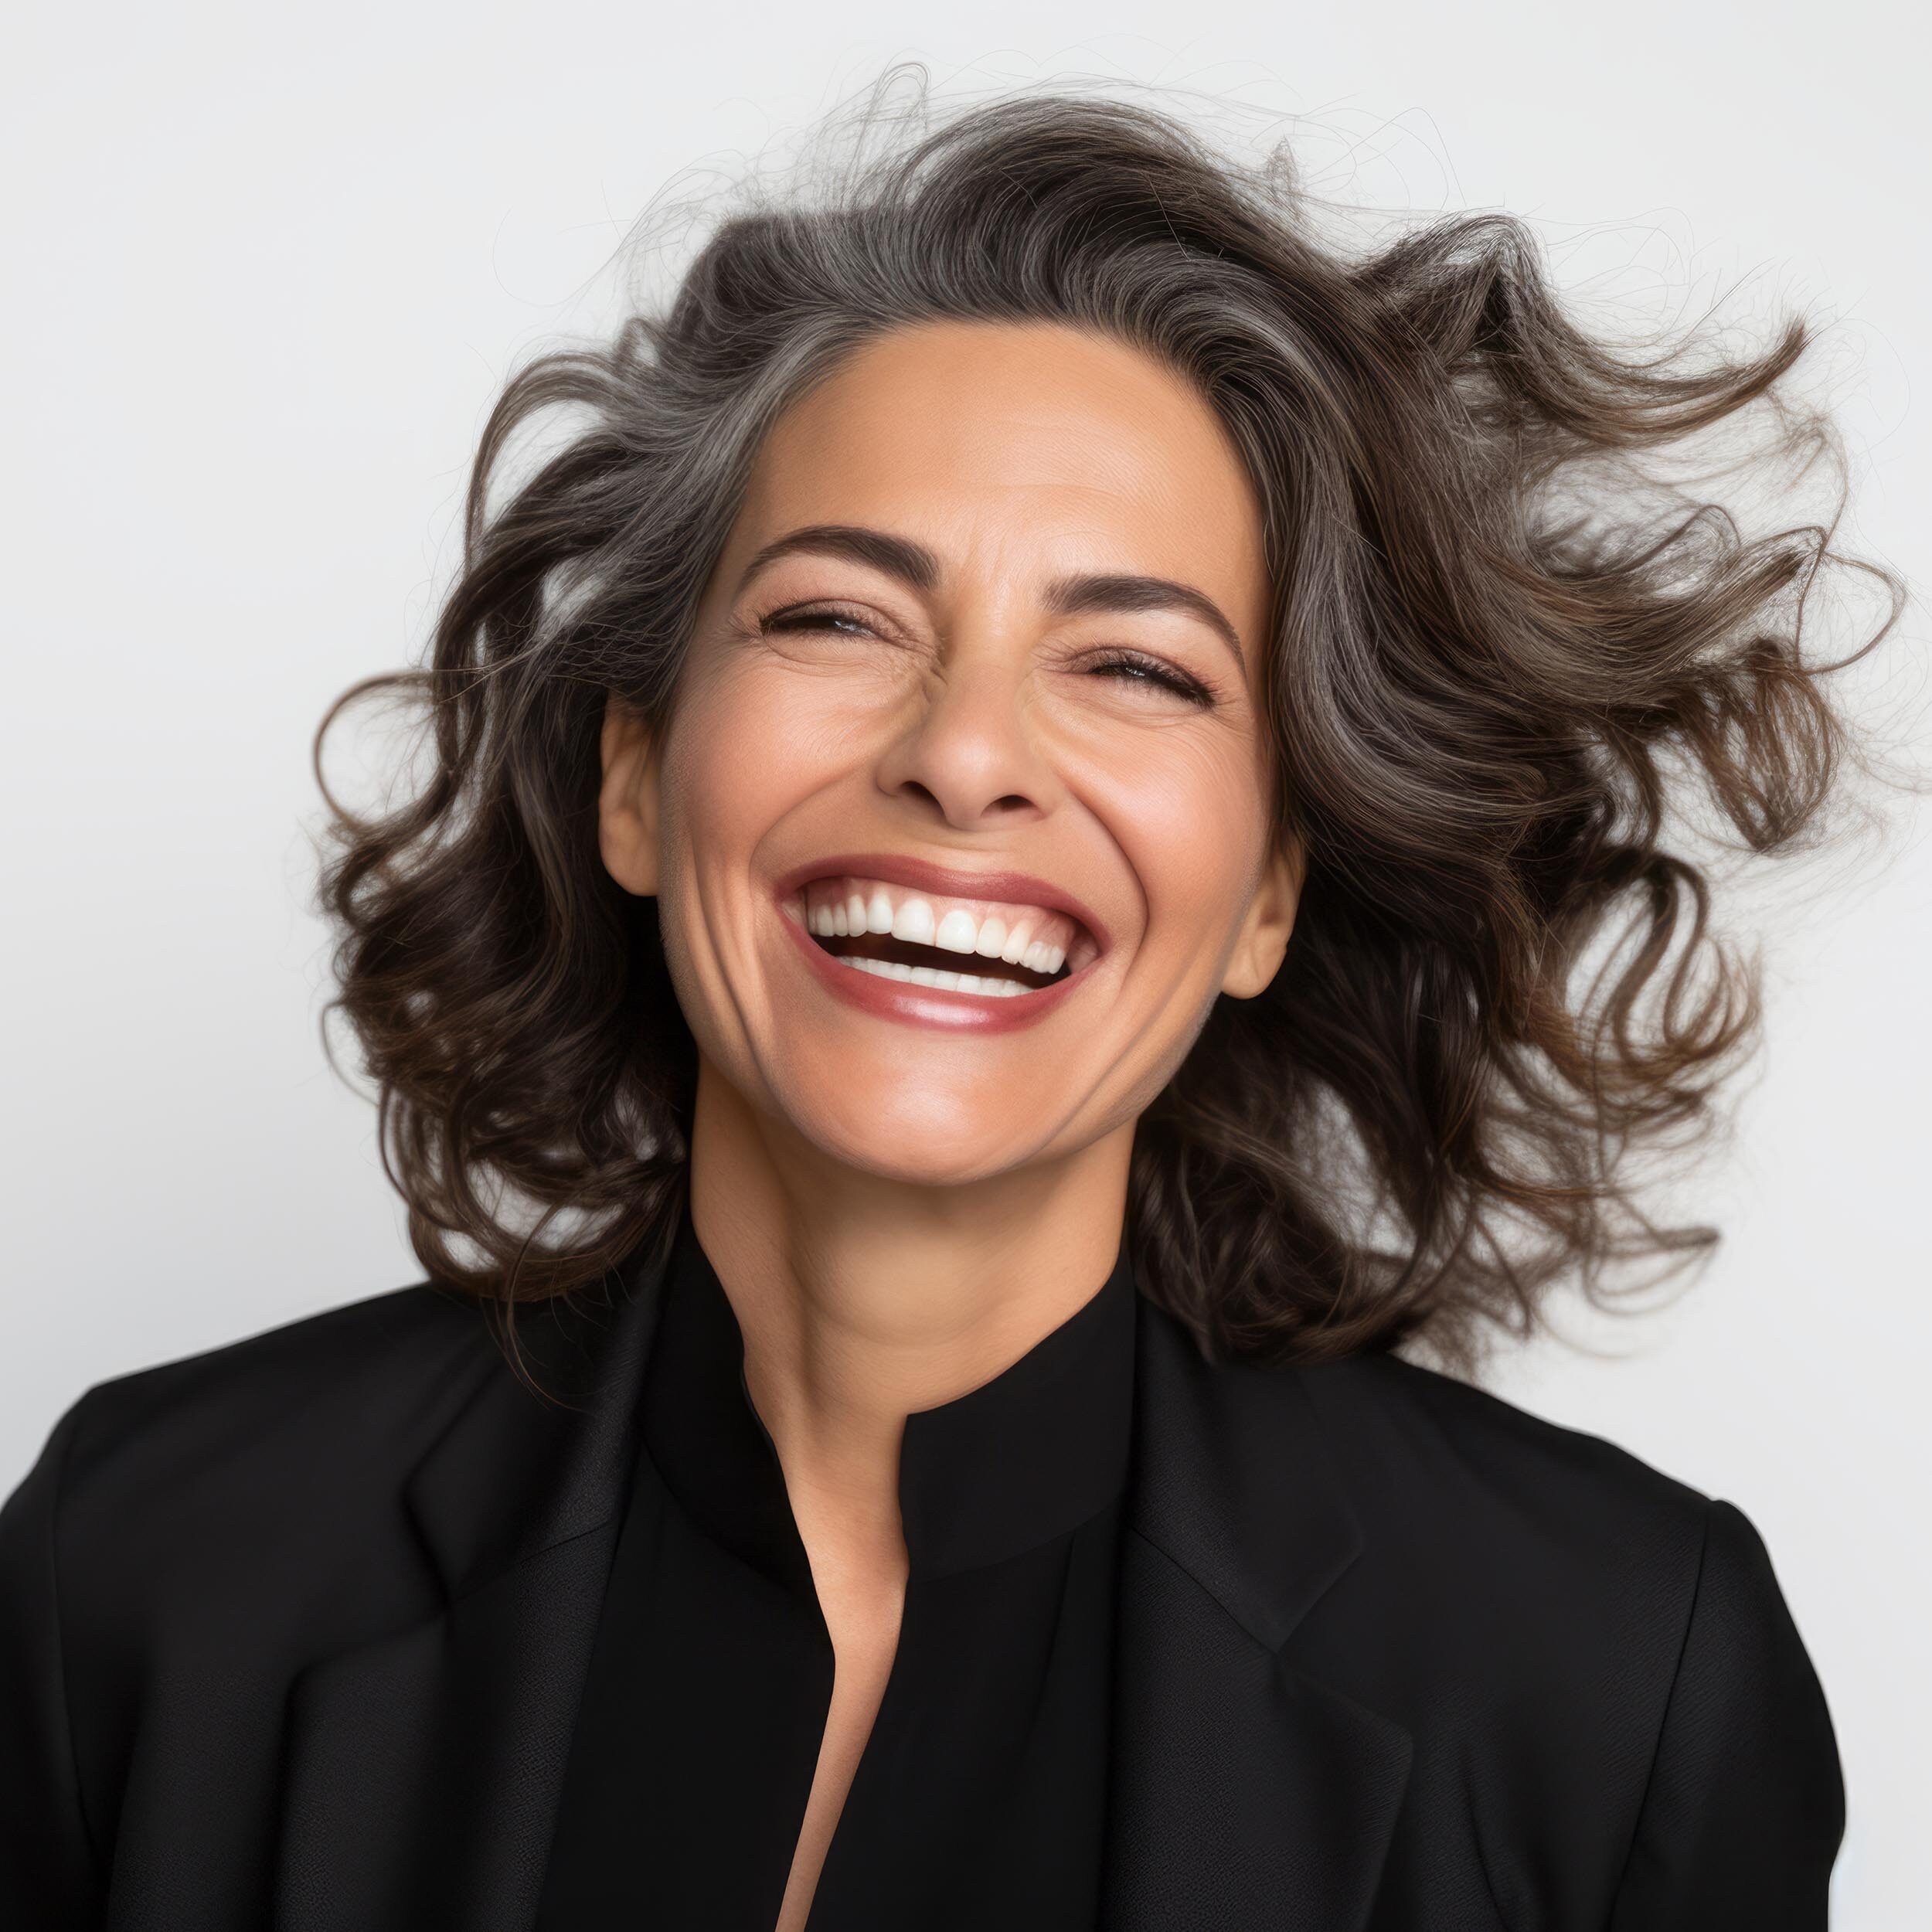 Woman with curly hair laughing heartily in a black blazer on a white background.